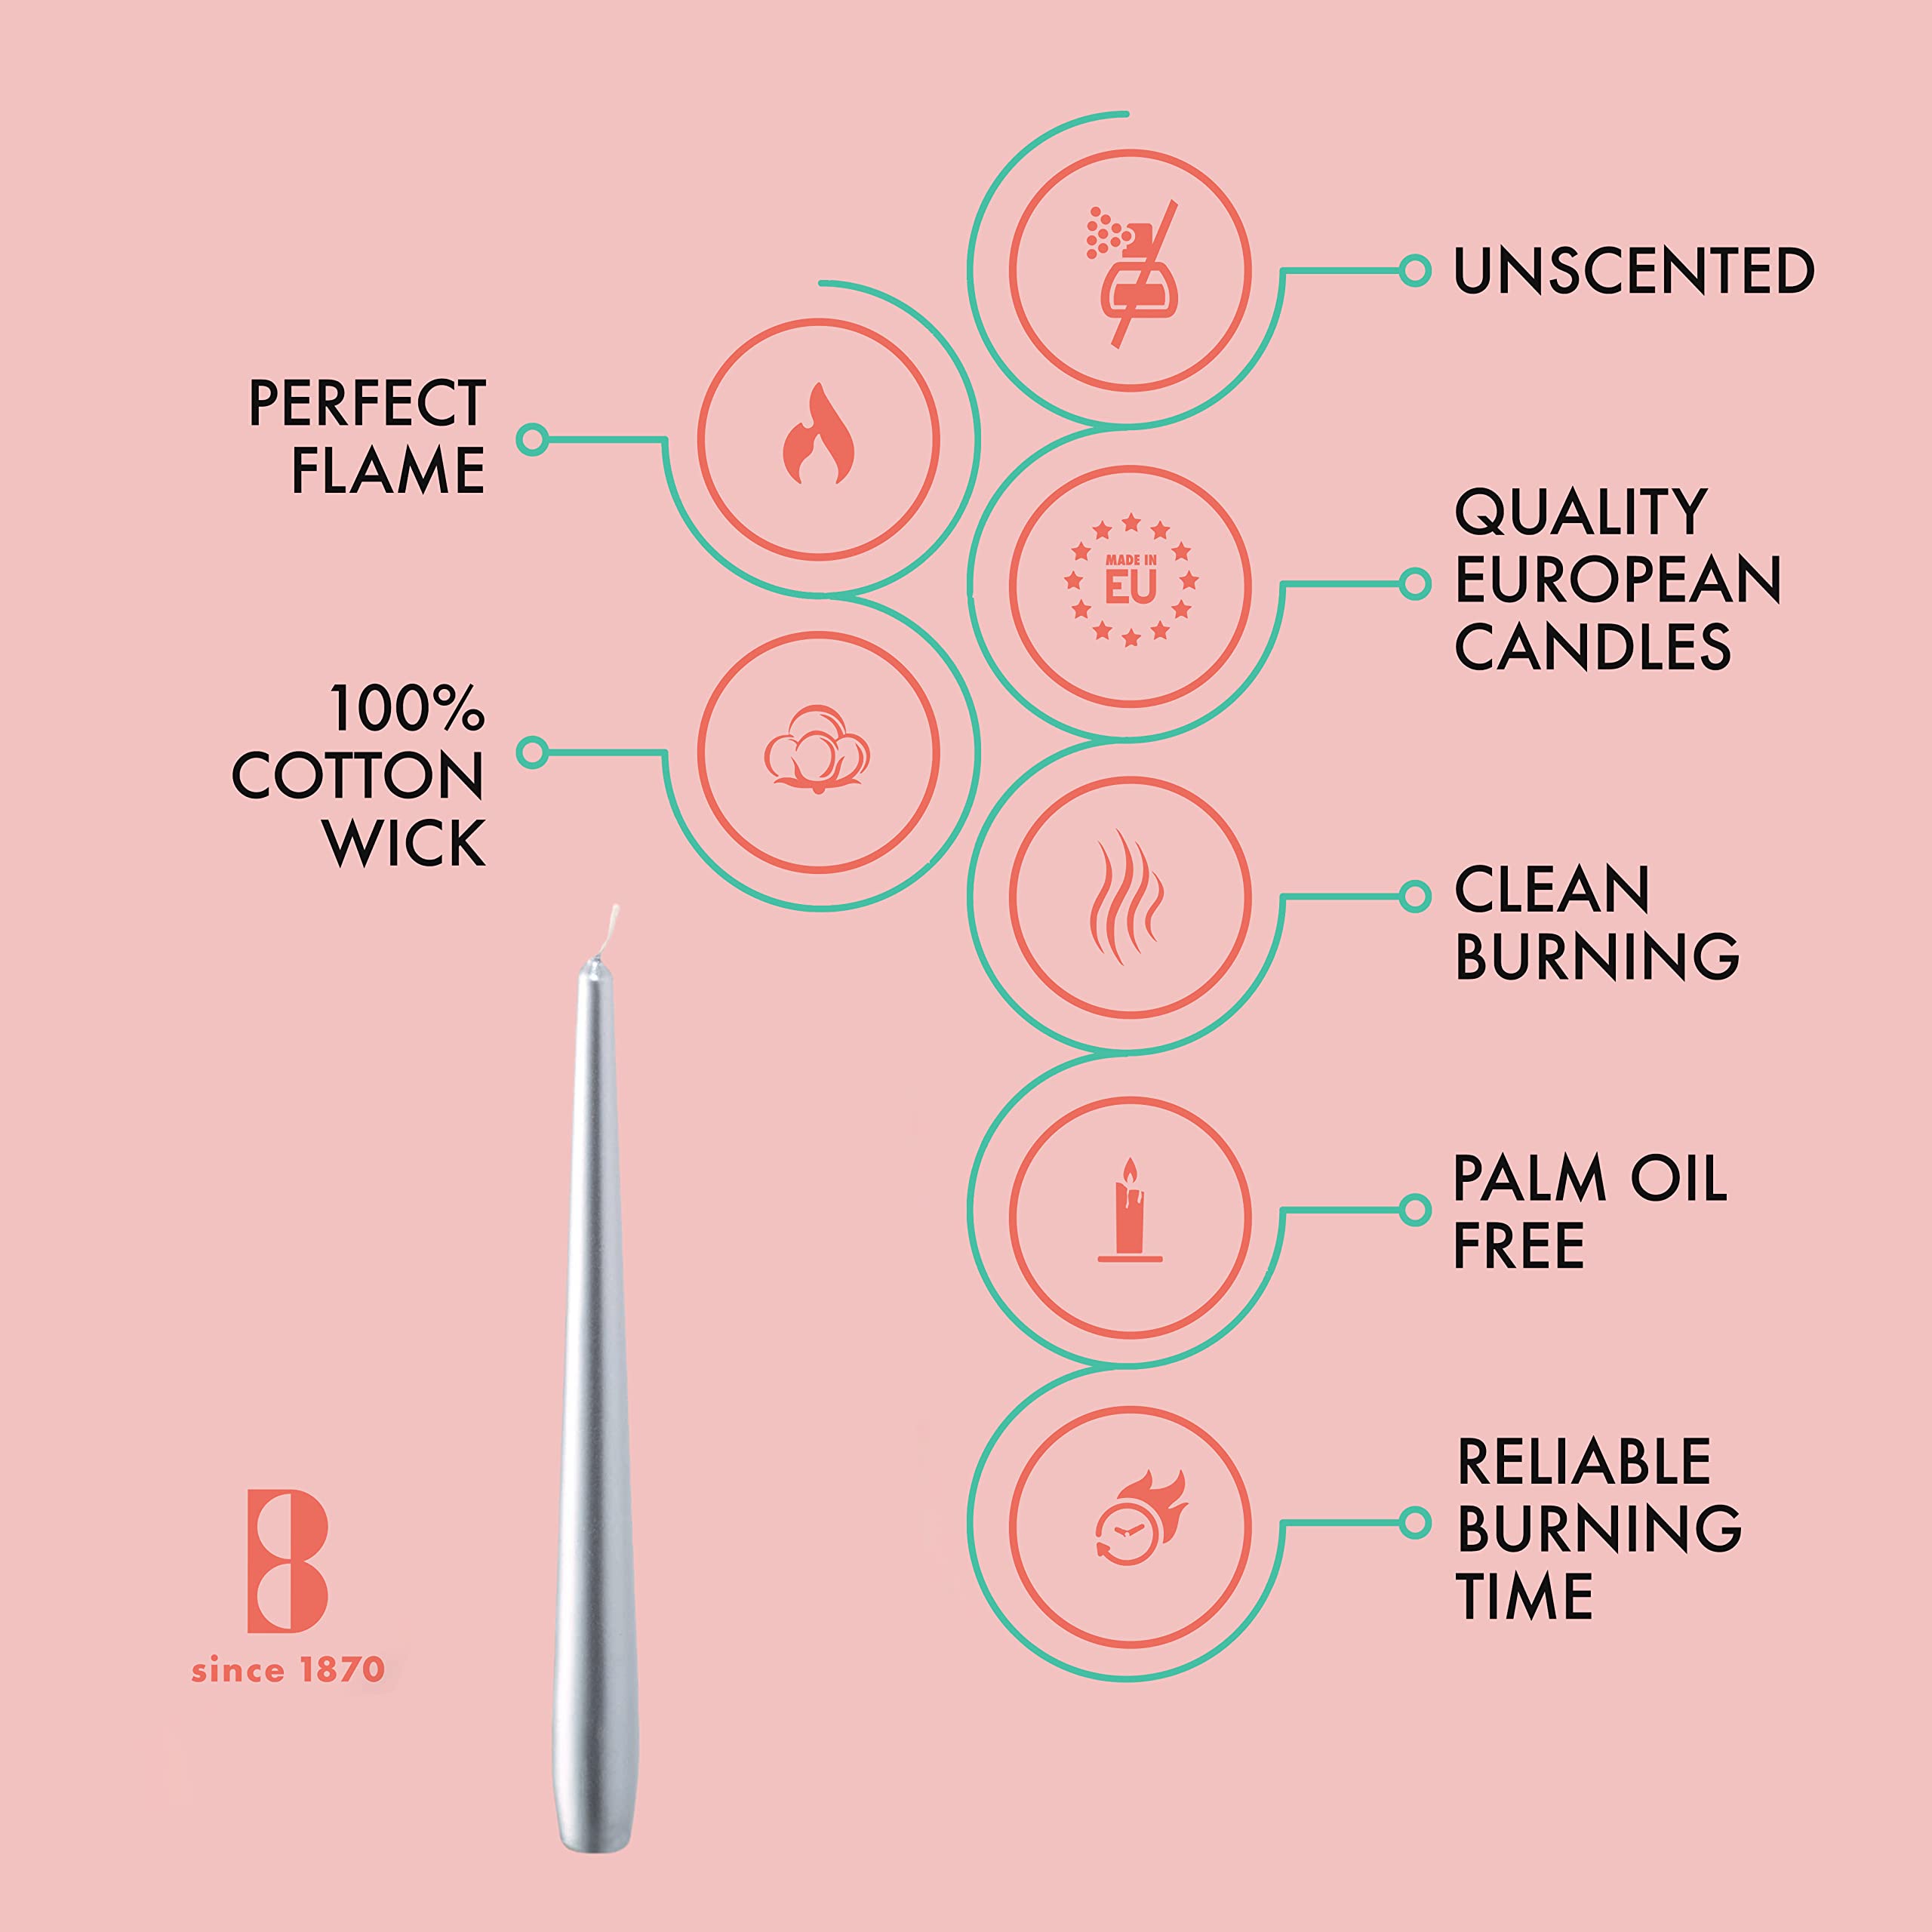 BOLSIUS Taper Candles - 8 Burn Hours - Premium European Quality - Unscented Smokeless & Dripless Household Party Candlesticks  - Good